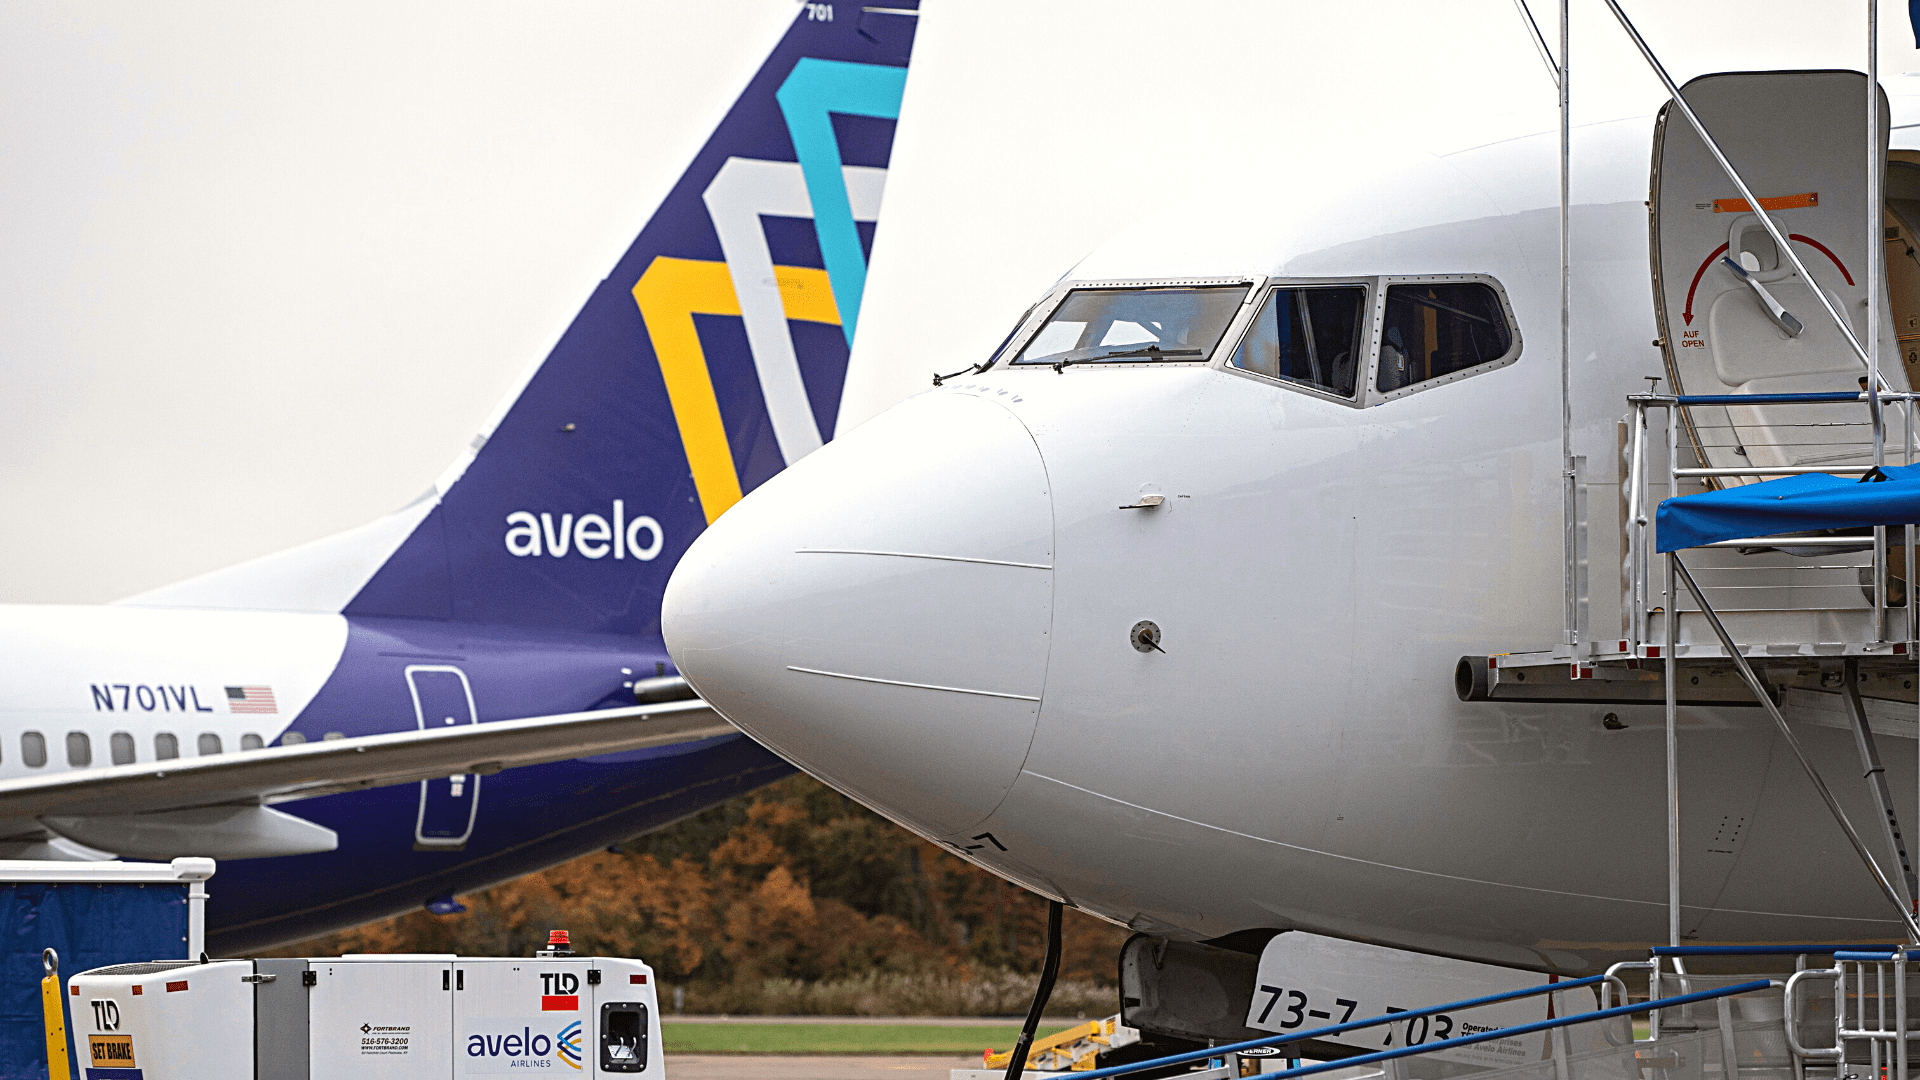 Featured image for “Avelo Airlines to open Wilmington base, 5 routes to Florida”